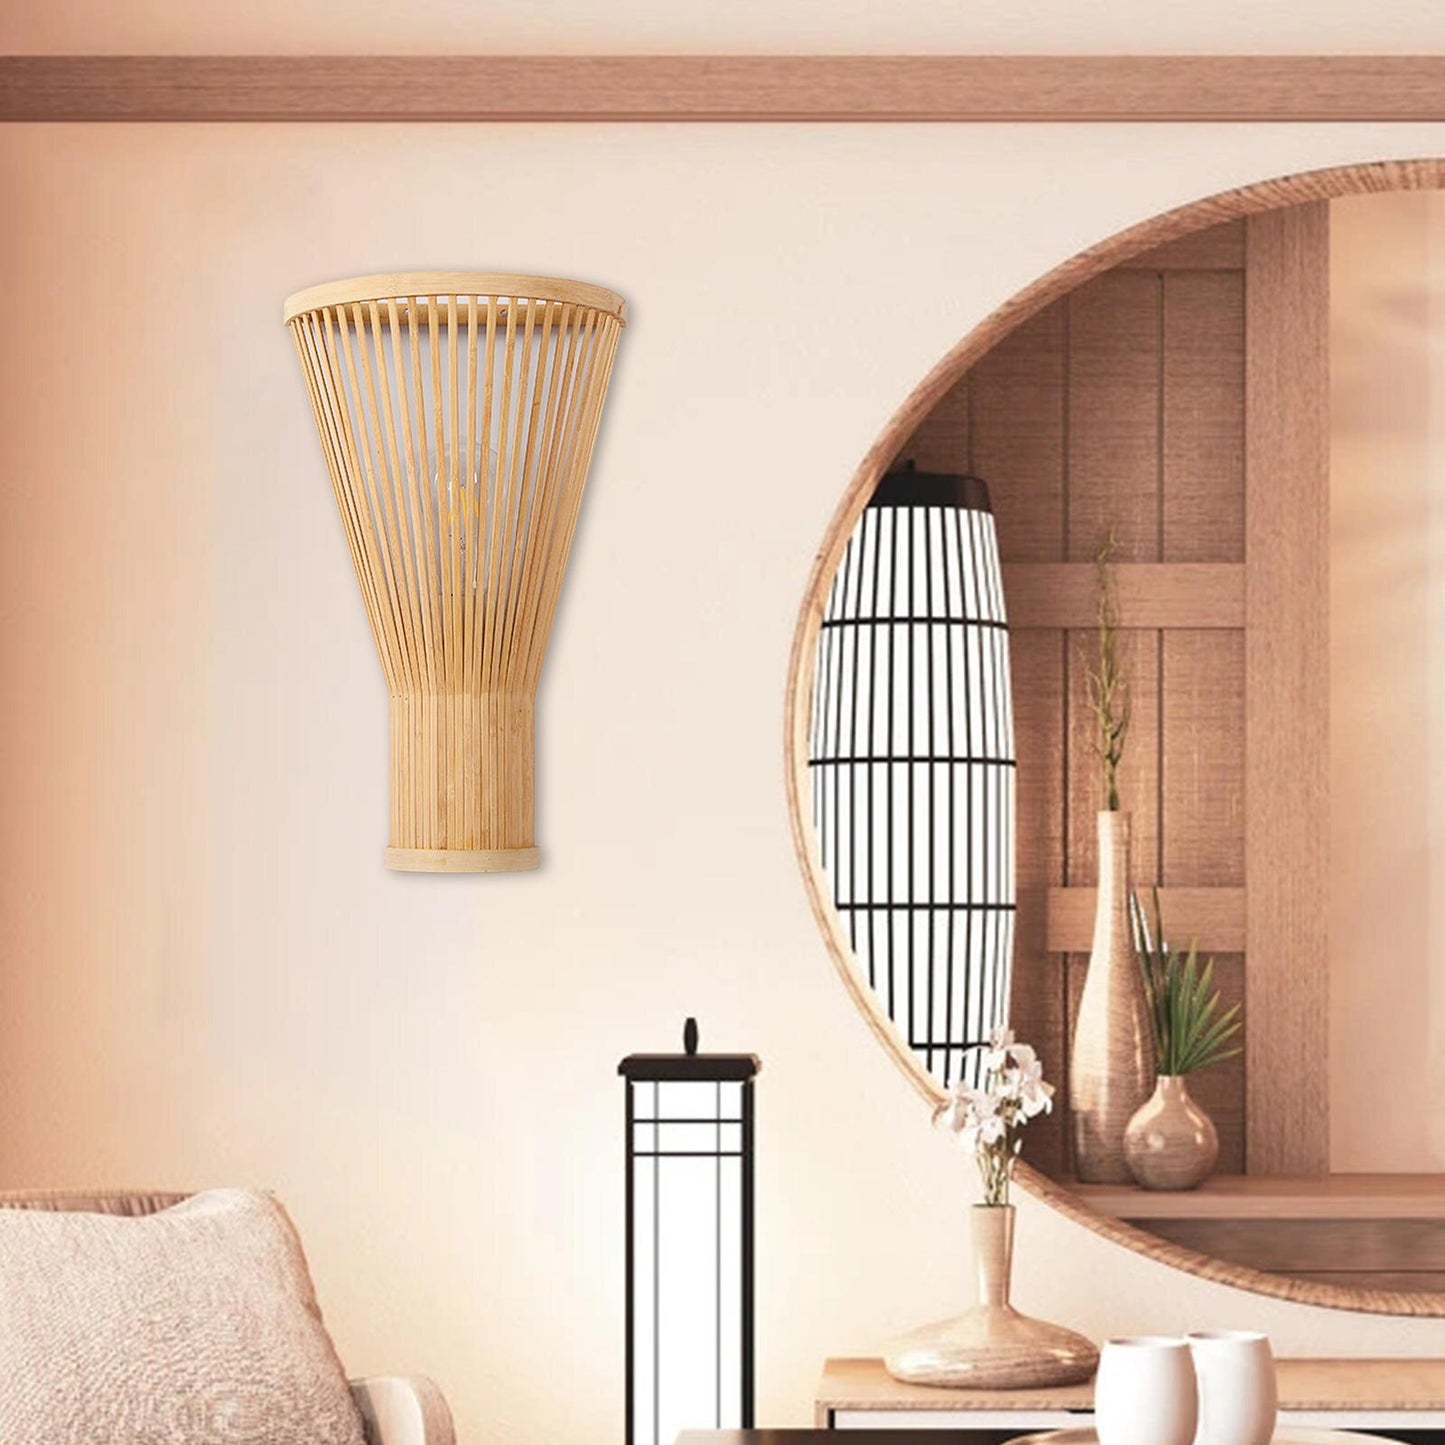 Vintage Night Lights with Creative Bamboo Wall Lamp